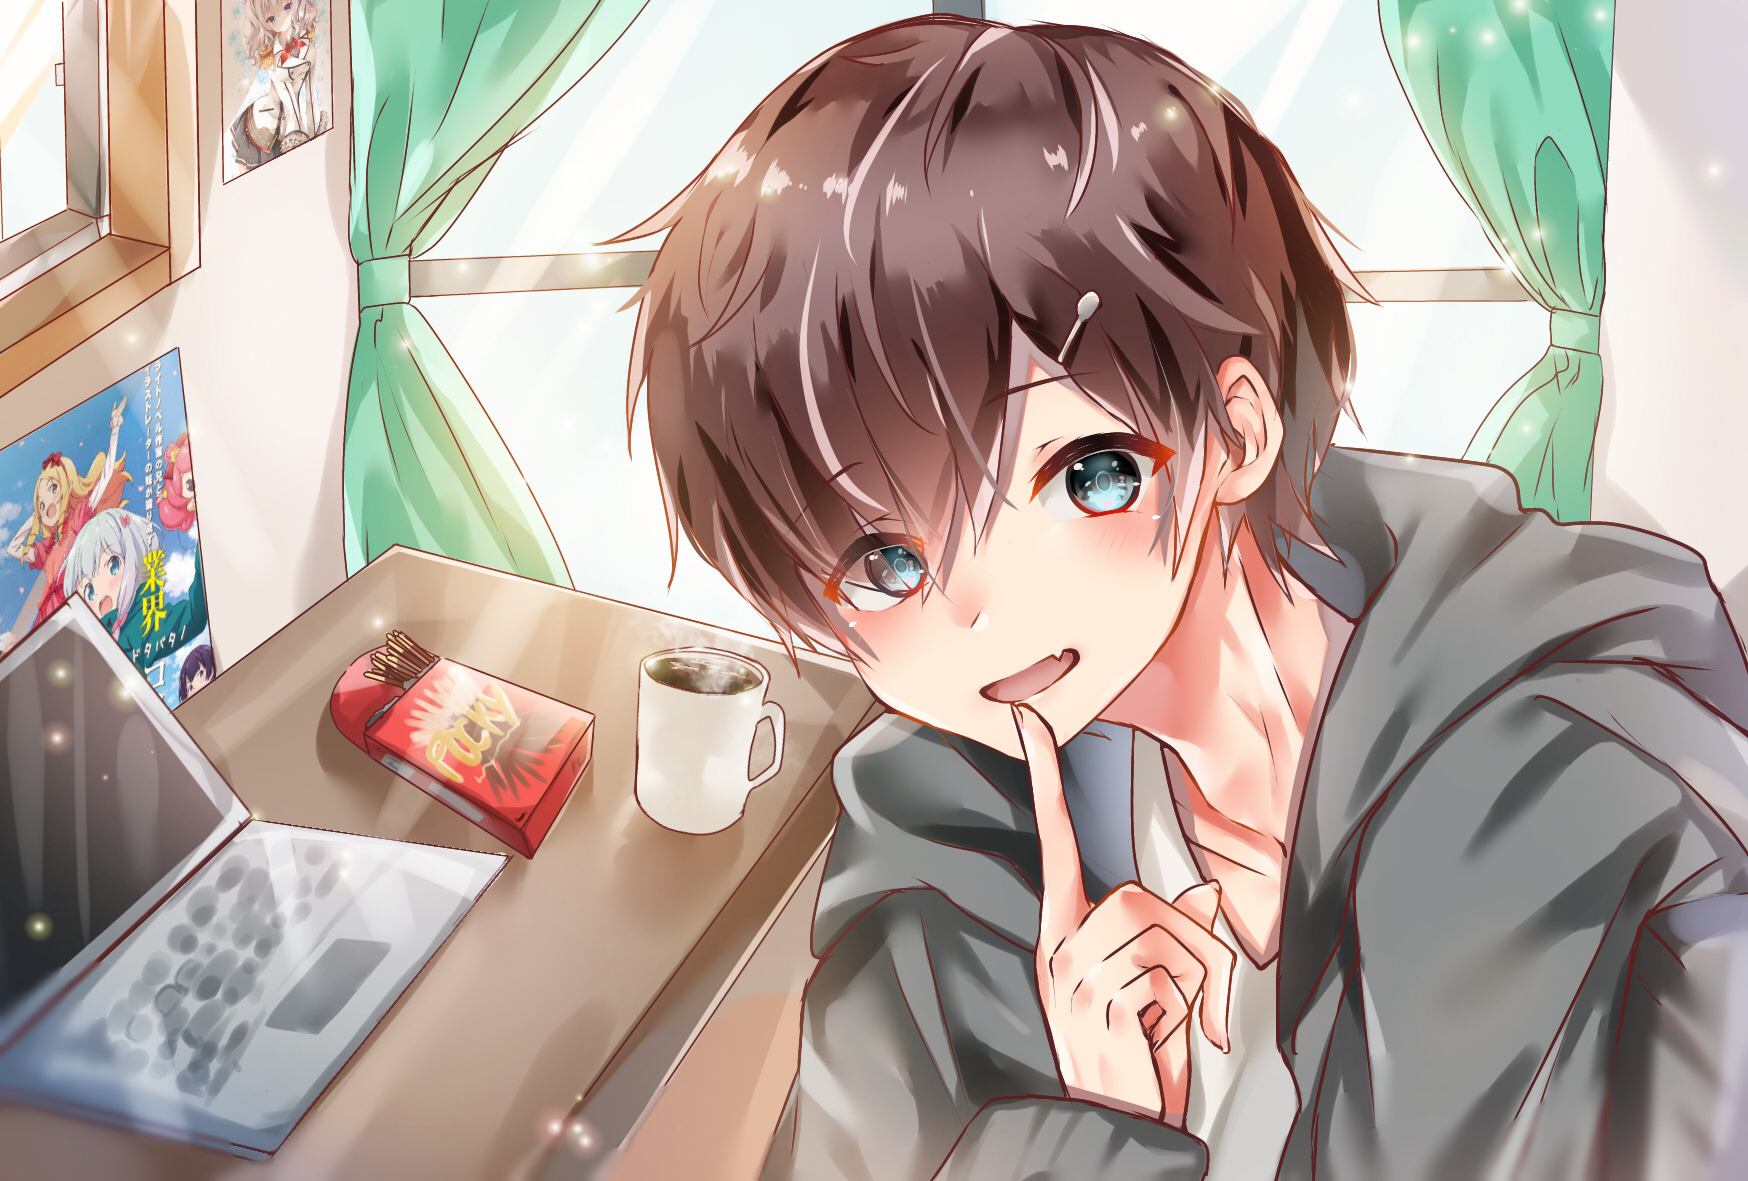 little anime boy with brown hair and blue eyes